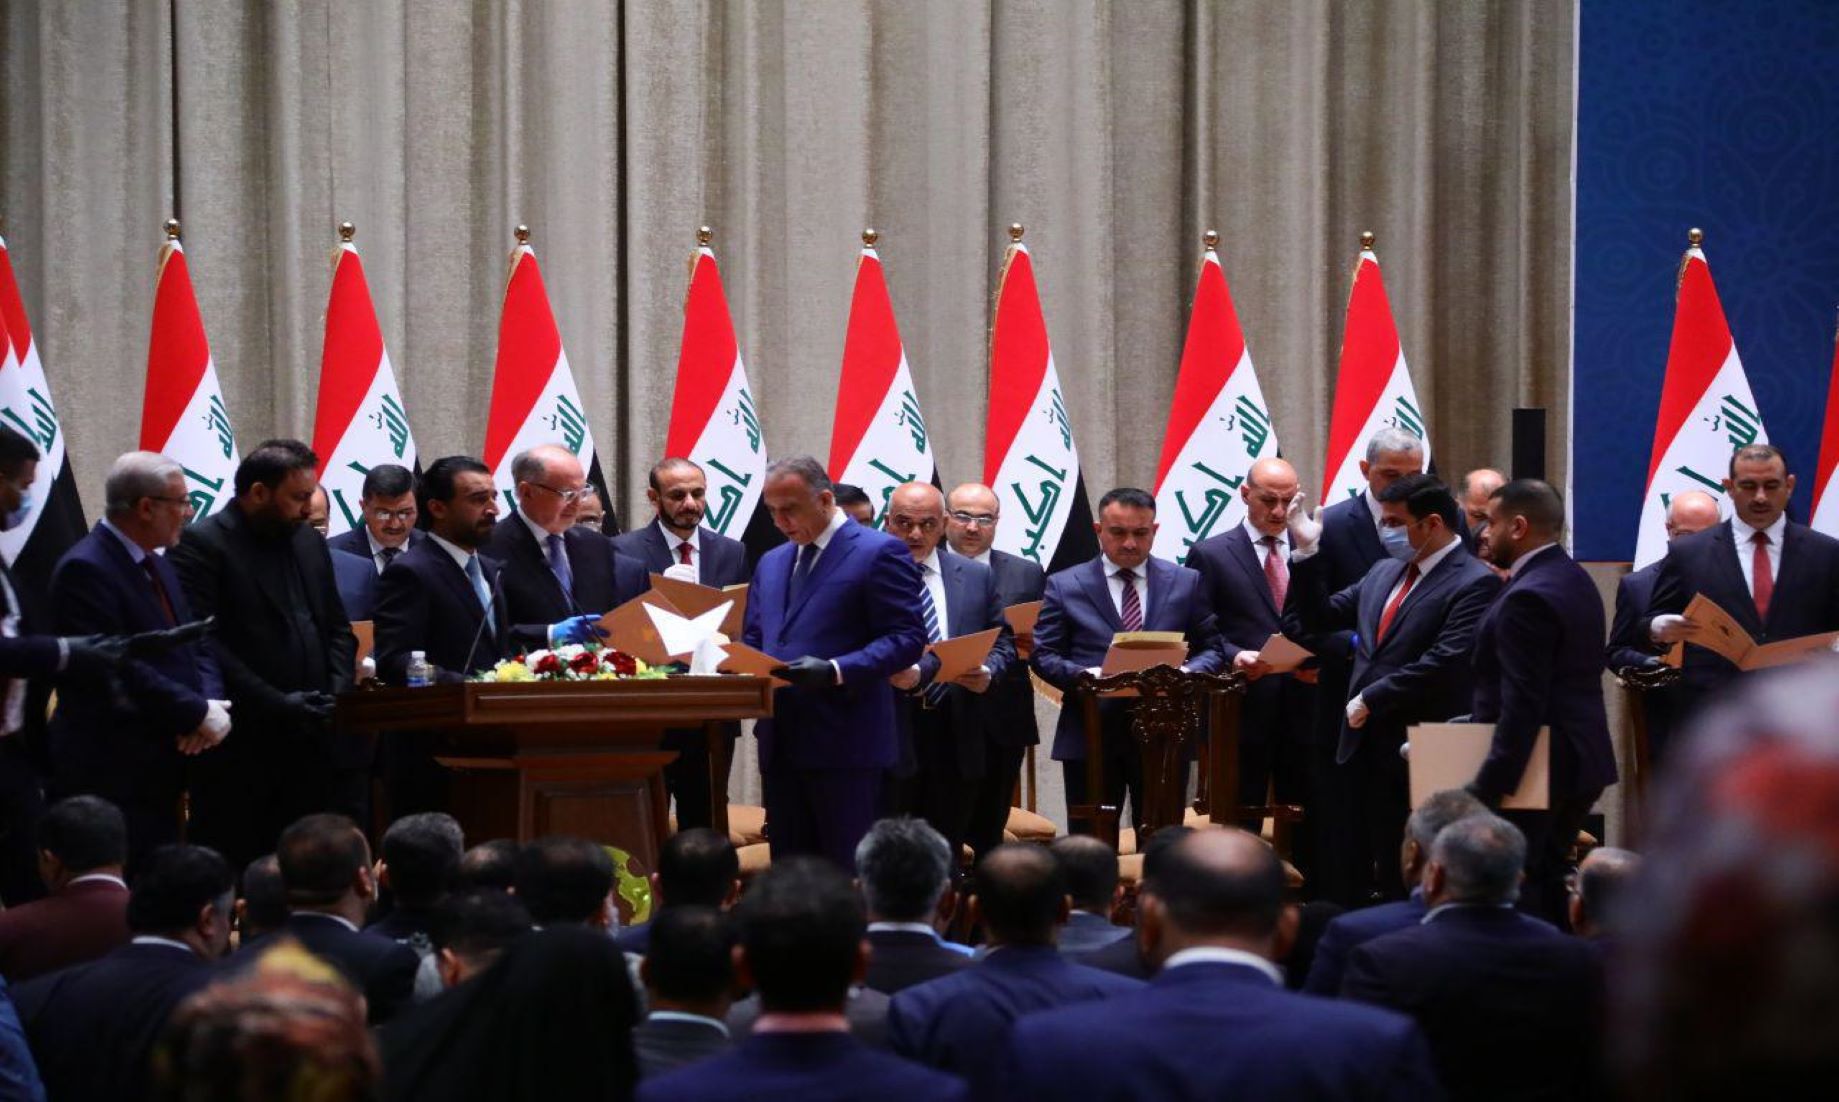 Iraqi PM Completes Cabinet Formation After Parliament Approves Last Two Ministers